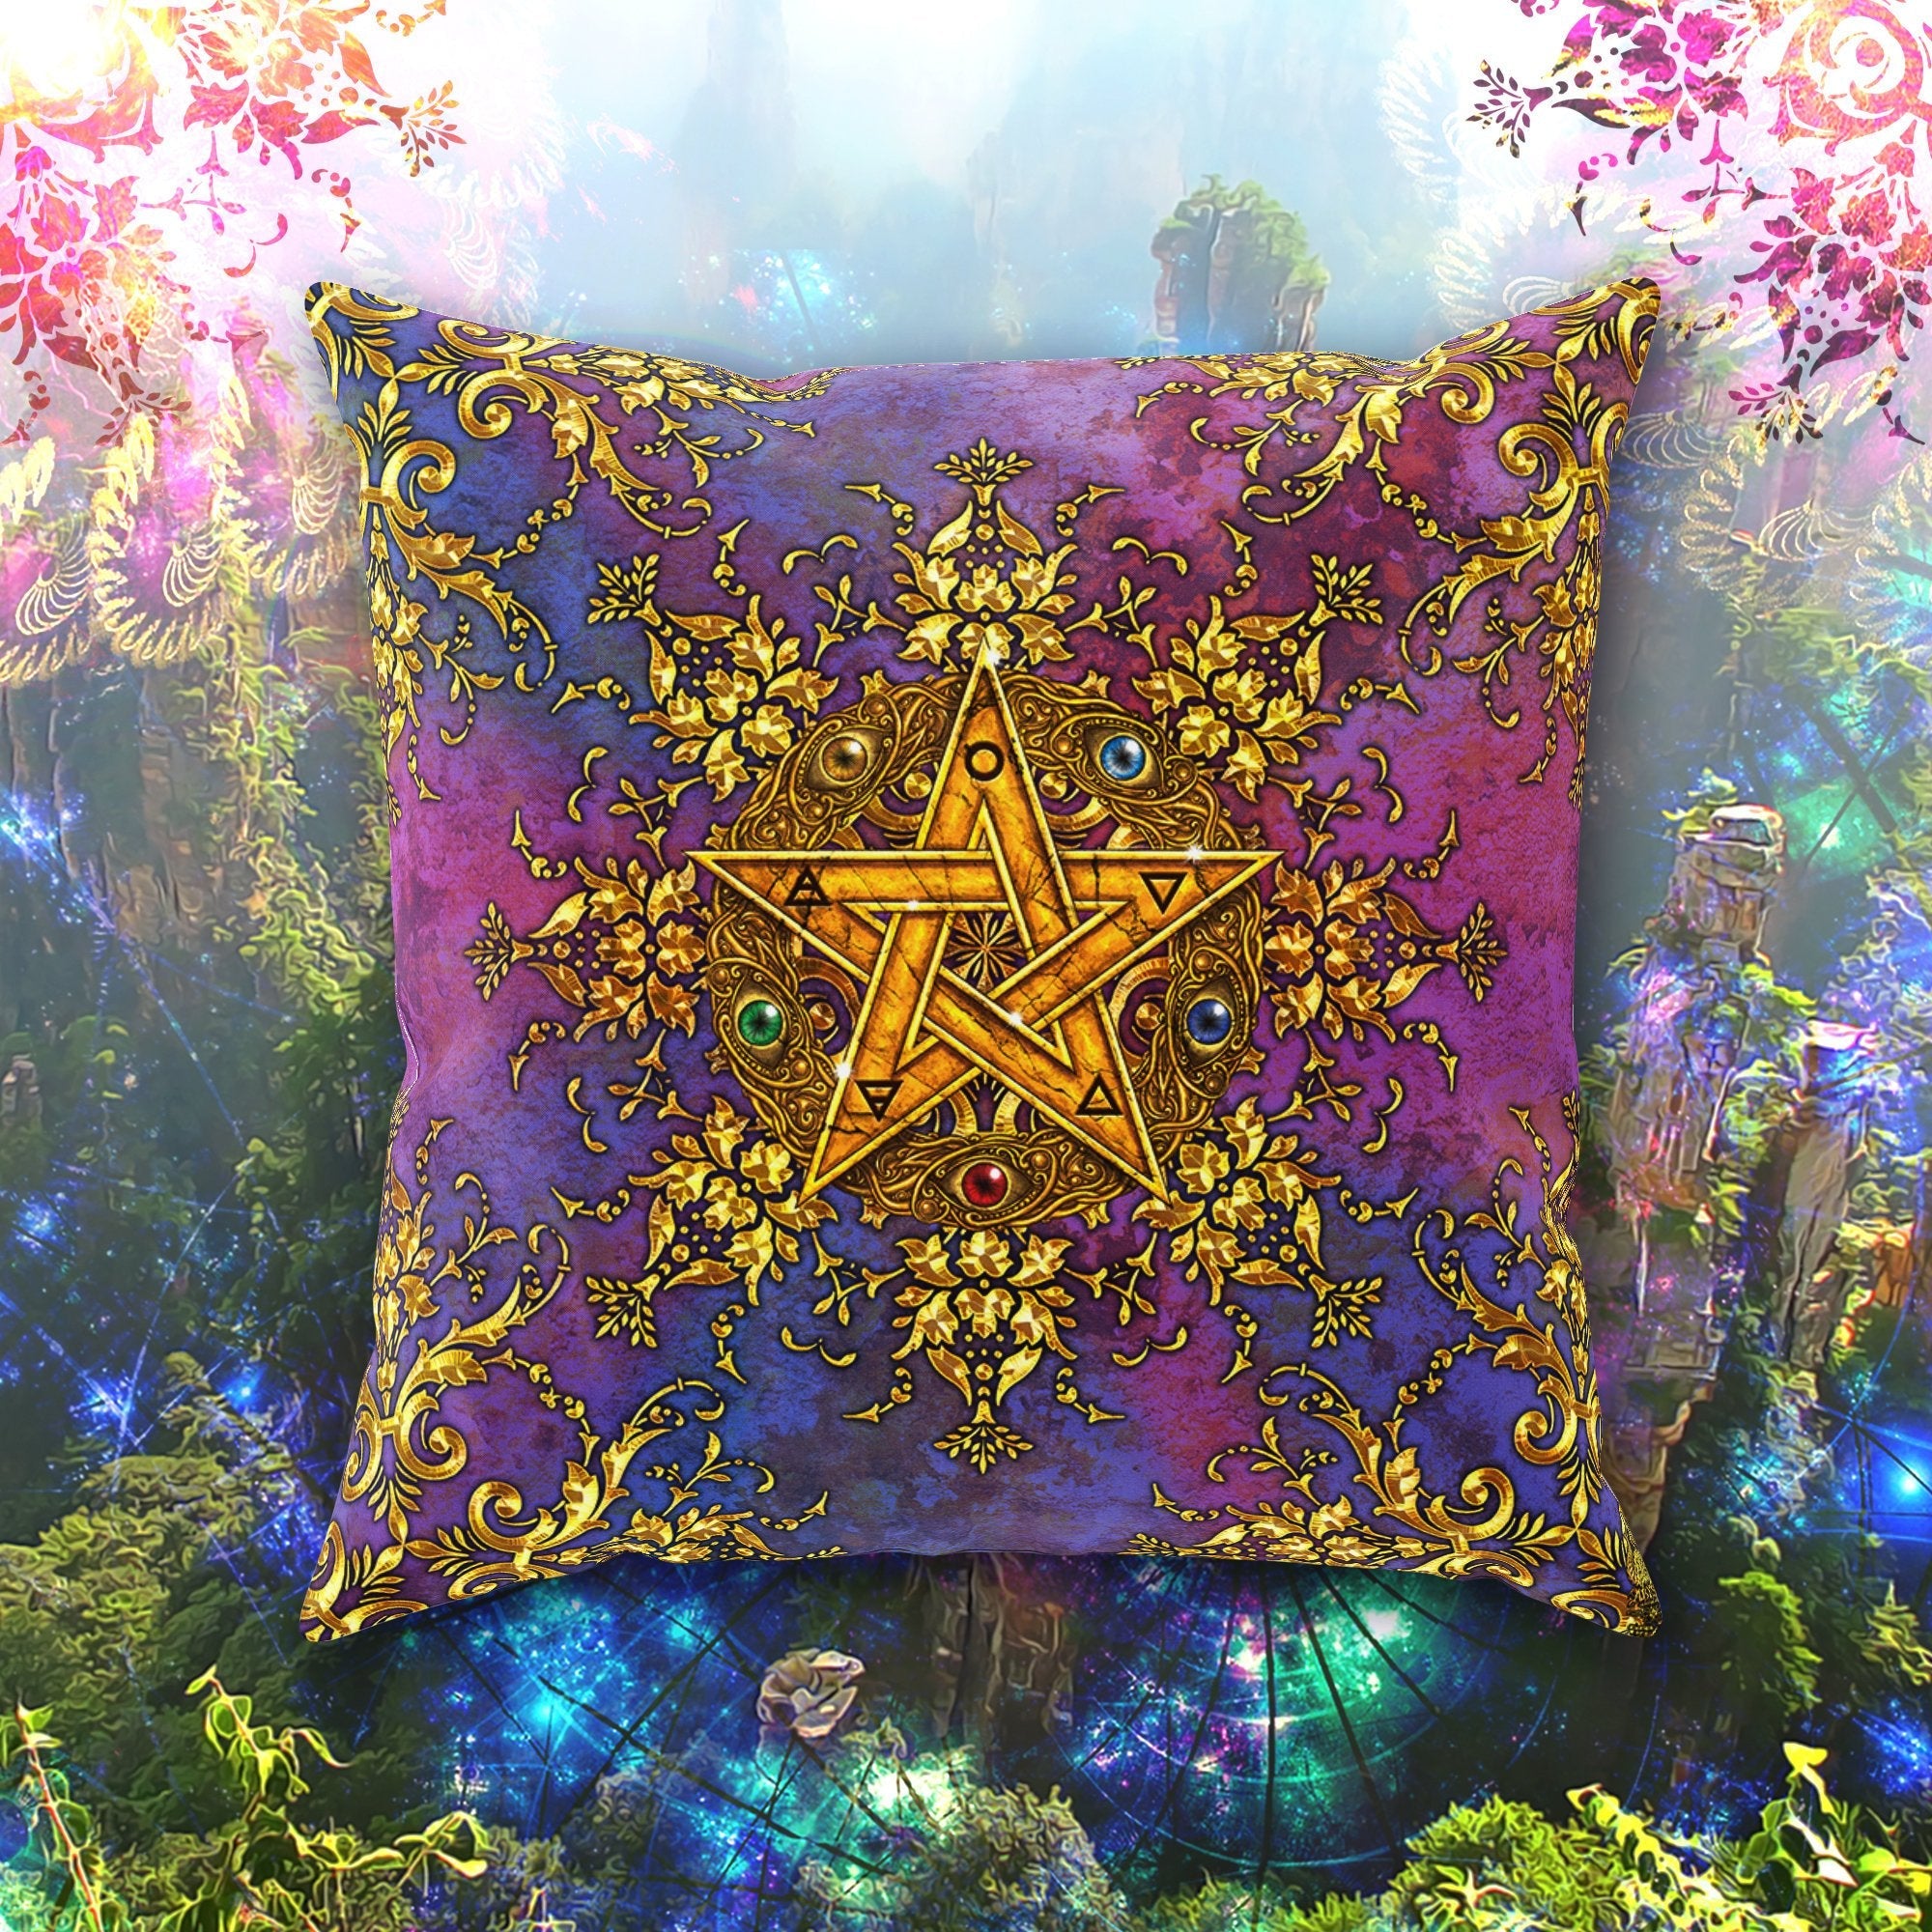 Witch Throw Pillow, Decorative Accent Cushion, Pentacle, Wiccan Home Decor, Pagan Art, Funky and Eclectic - Gold - Abysm Internal